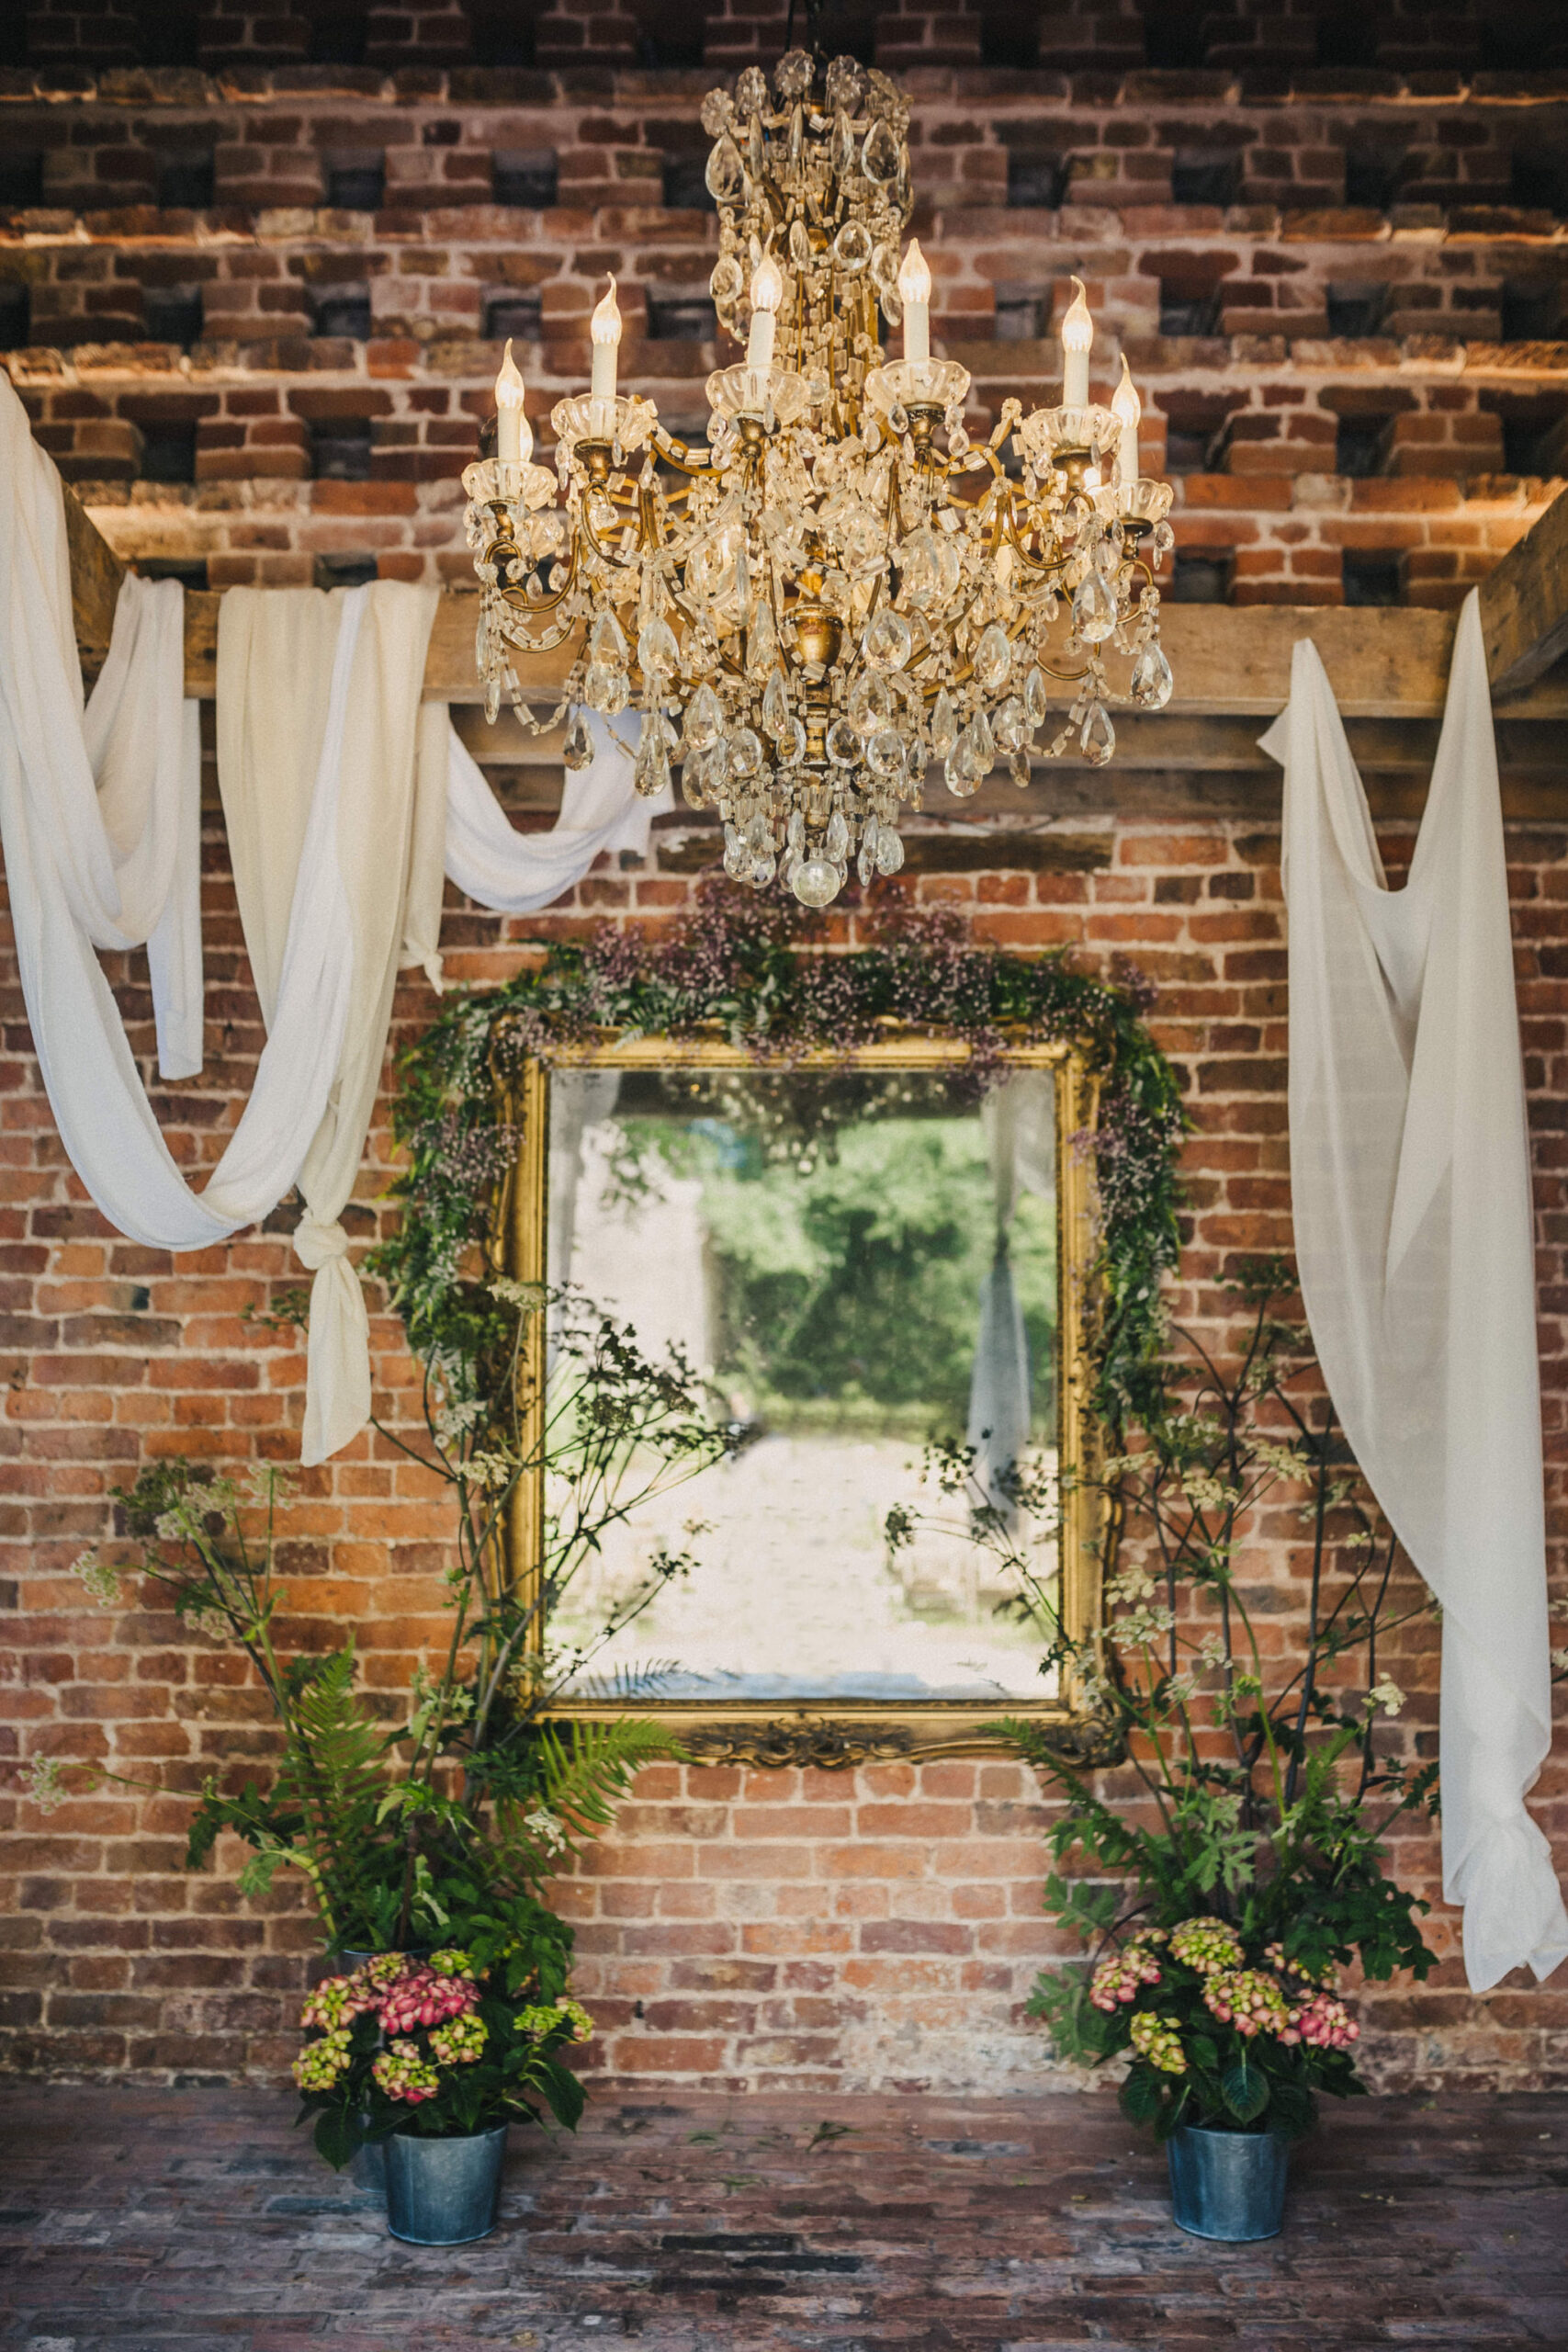 An image of a gold ornate mirror hanging on an exposed red brick wall which is draped in green foliage with a crystal chandelier hanging above